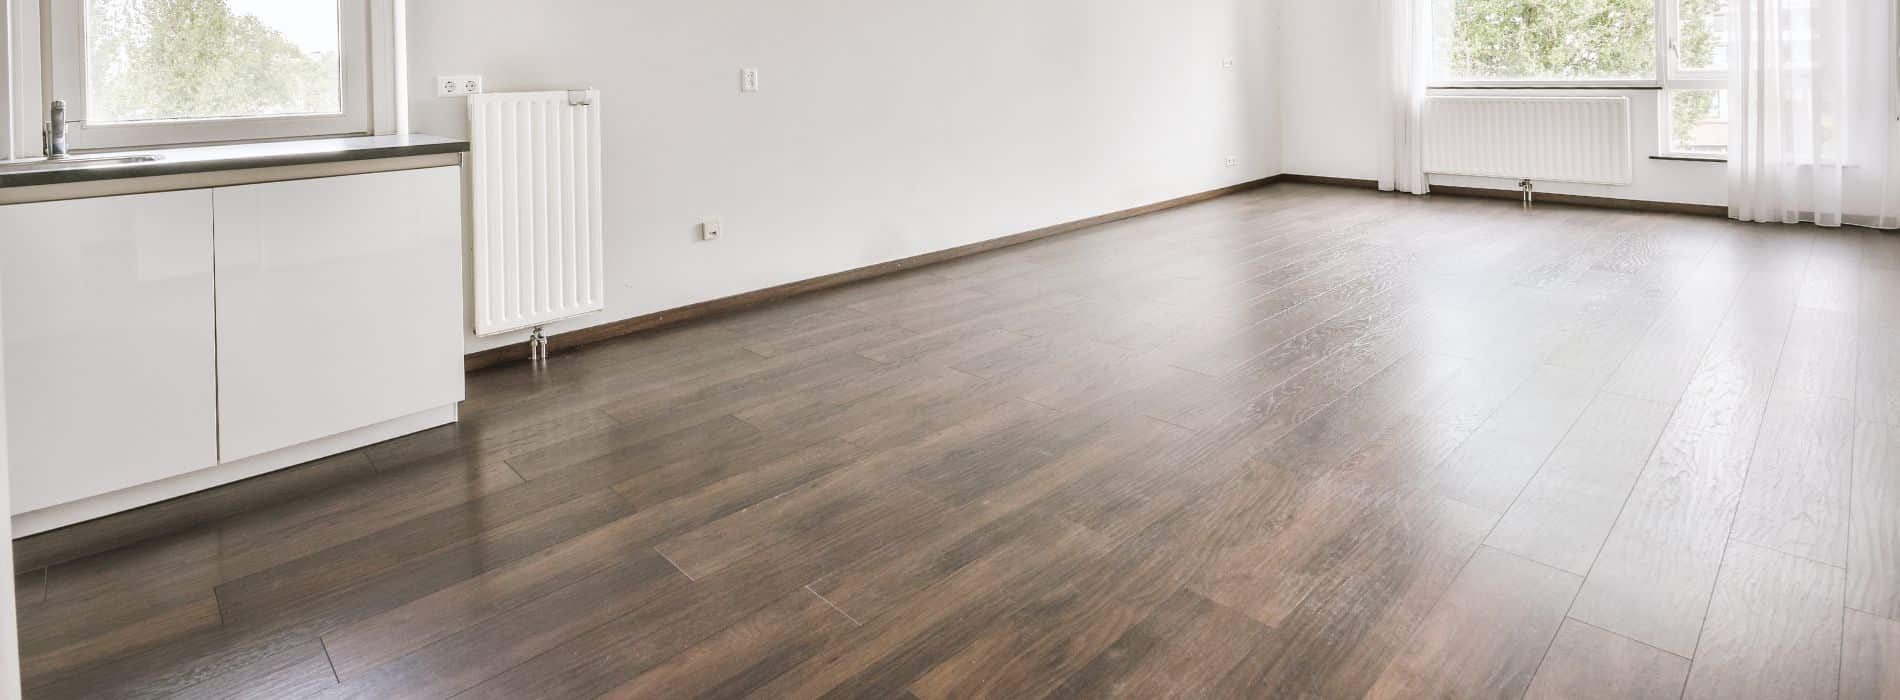 Impeccably refurbished 7-year-old hardwood floor in Kentish Town, NW5. Employing Bona 2.2K Frost whitewashing and Traffic HD 18% sheen matte lacquer, Mr Sander® have achieved an enduring and visually captivating outcome. 